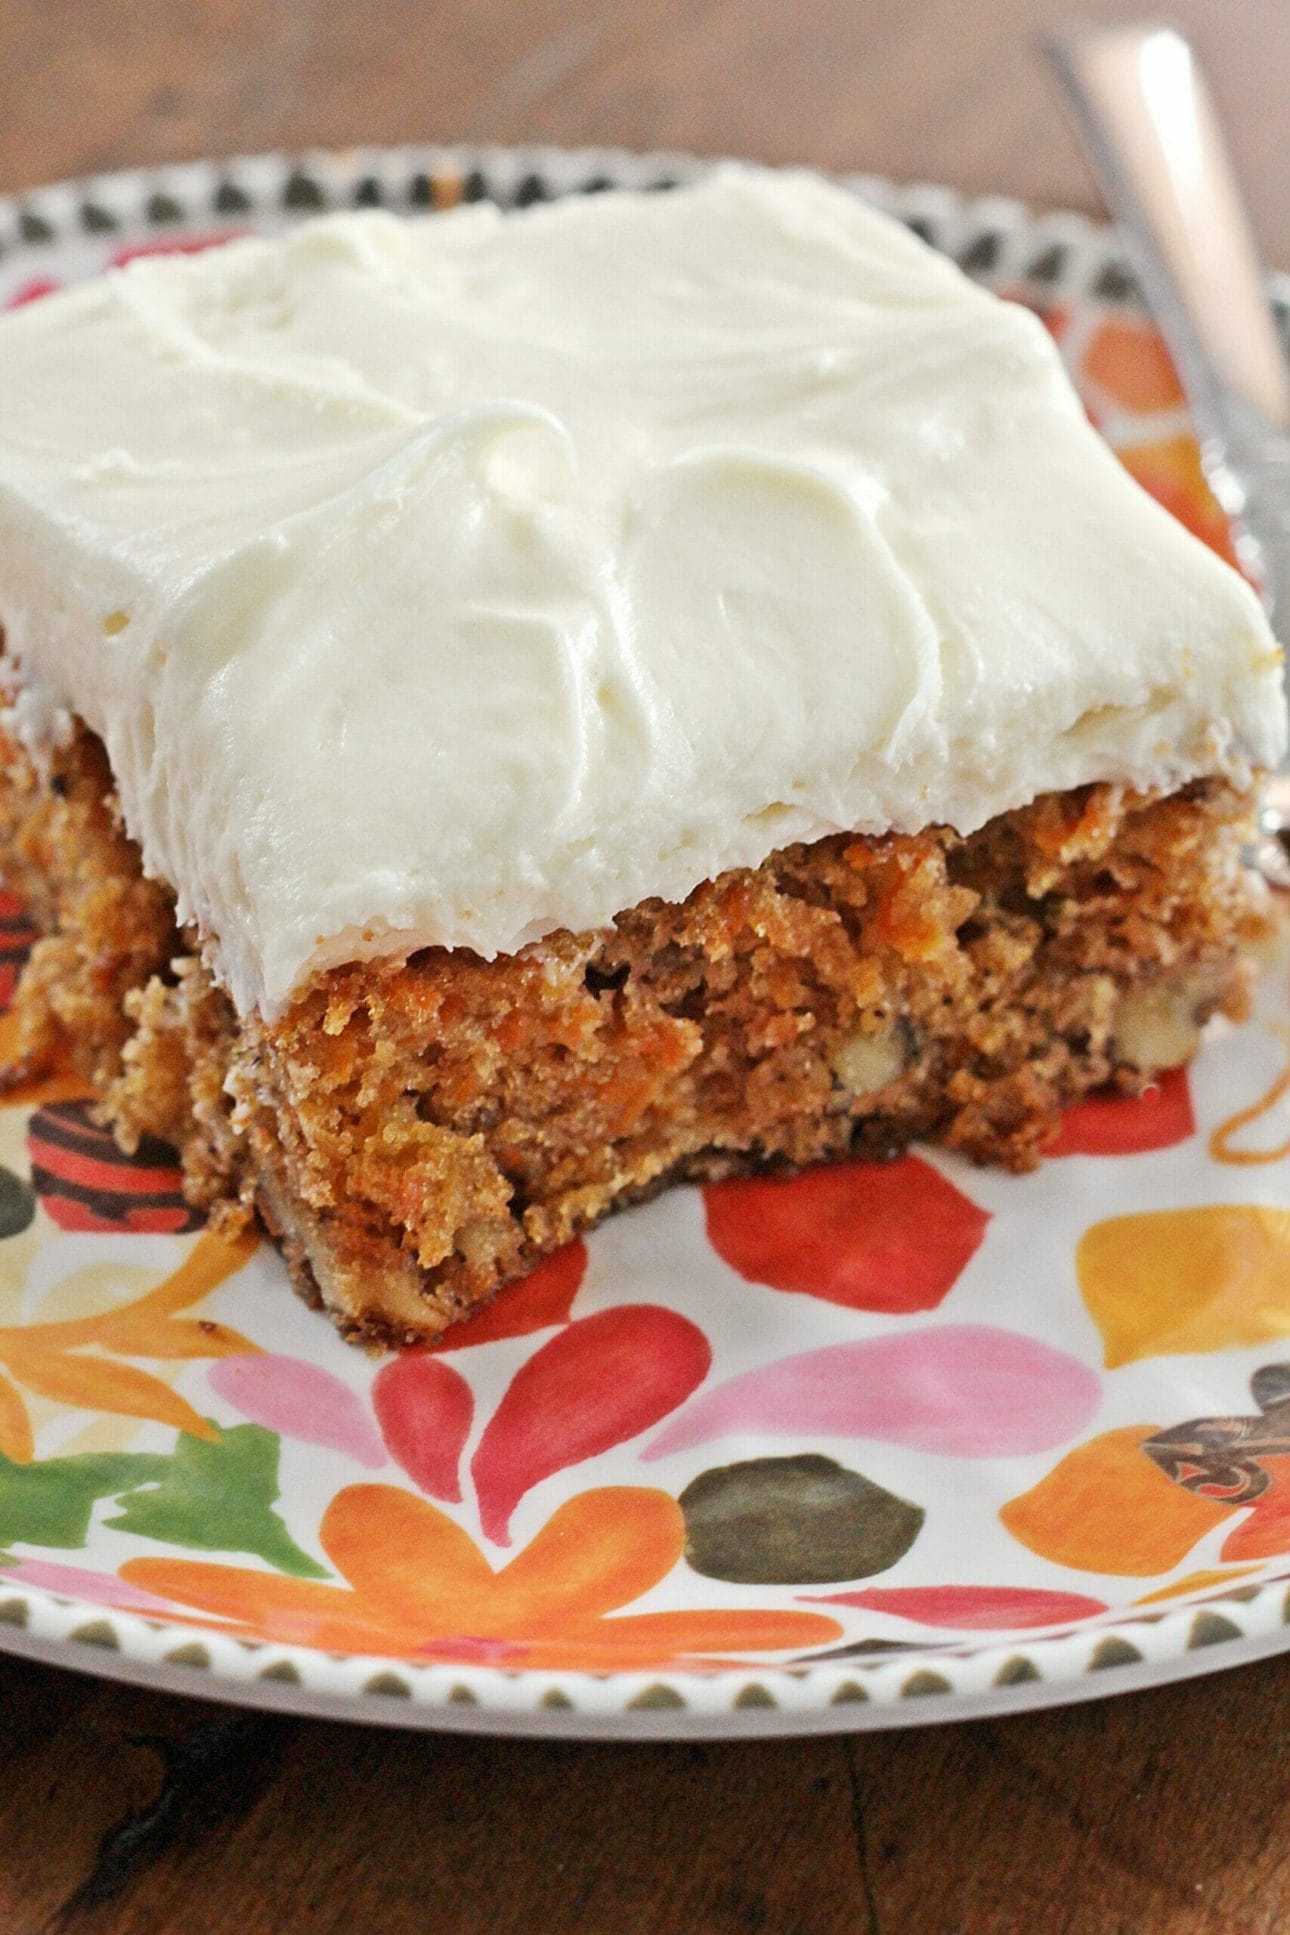 Ina's Carrot Pineapple Cake with Cream Cheese Frosting